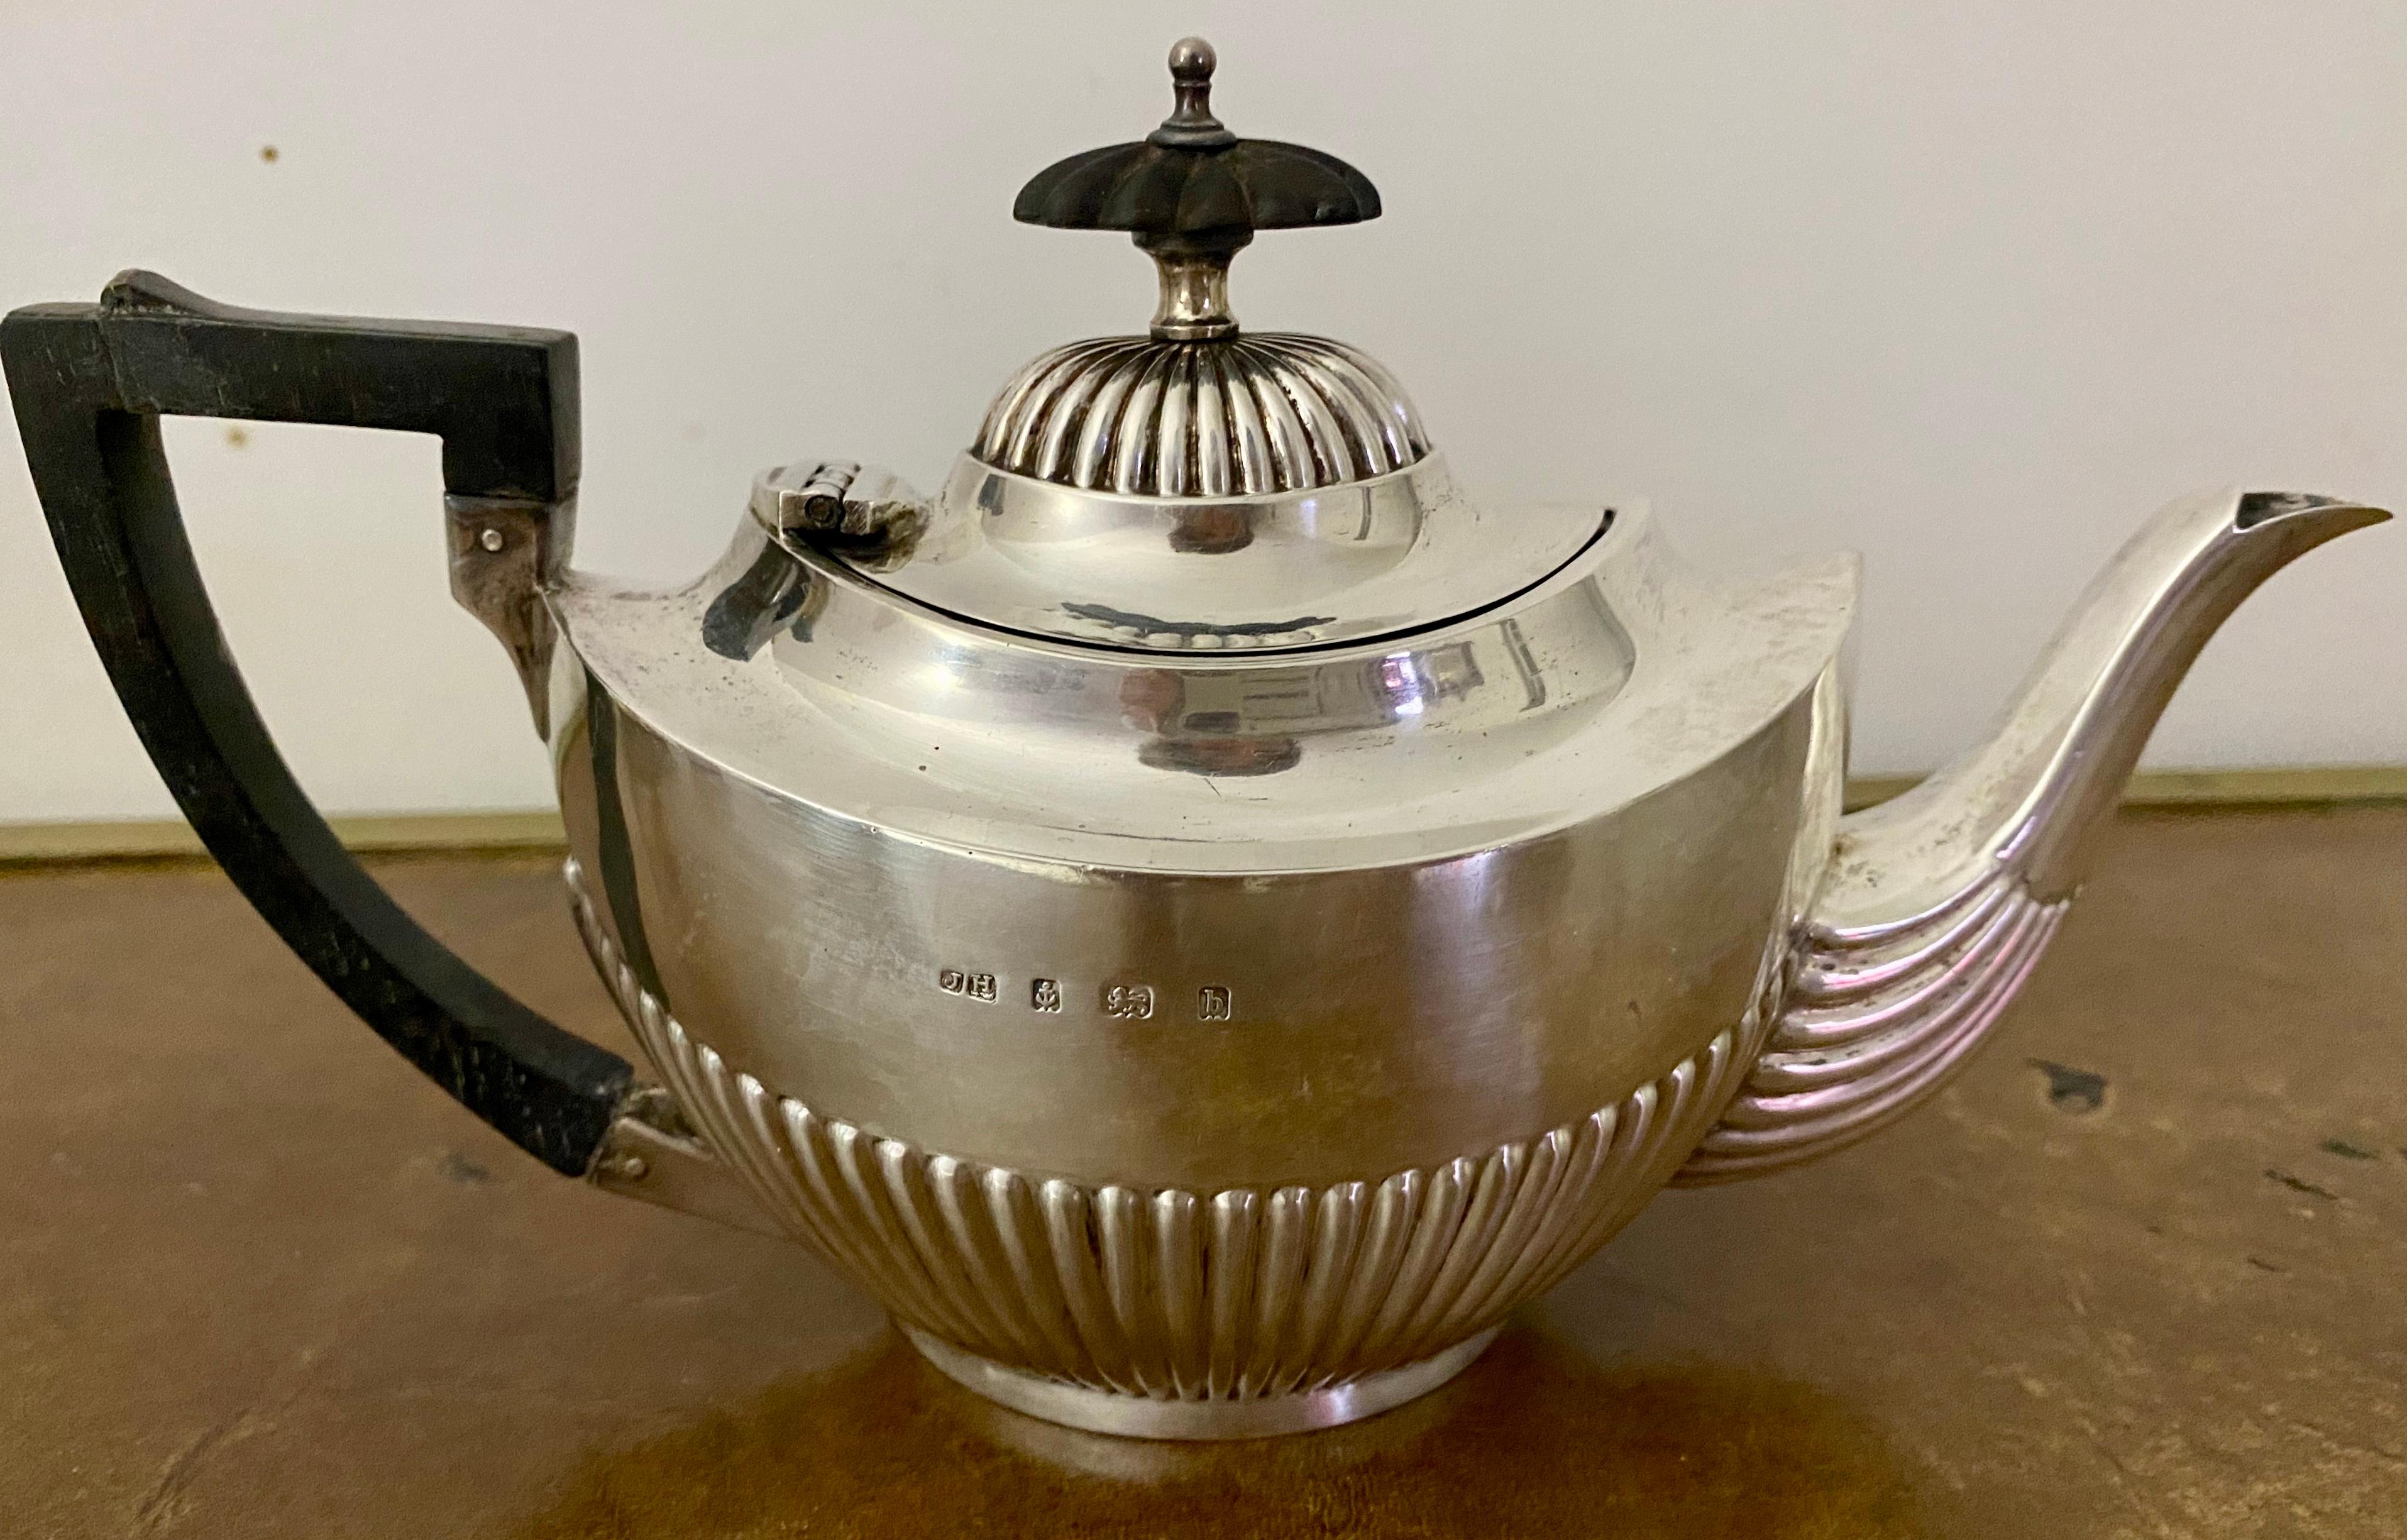 This charming small bachelor tea pot is a wonderfully unique piece of antique silver, intended for one person's use. The piece has an oval form, the lower portion of the body is embellished with fluted decoration. Hallmarks are on the body of the